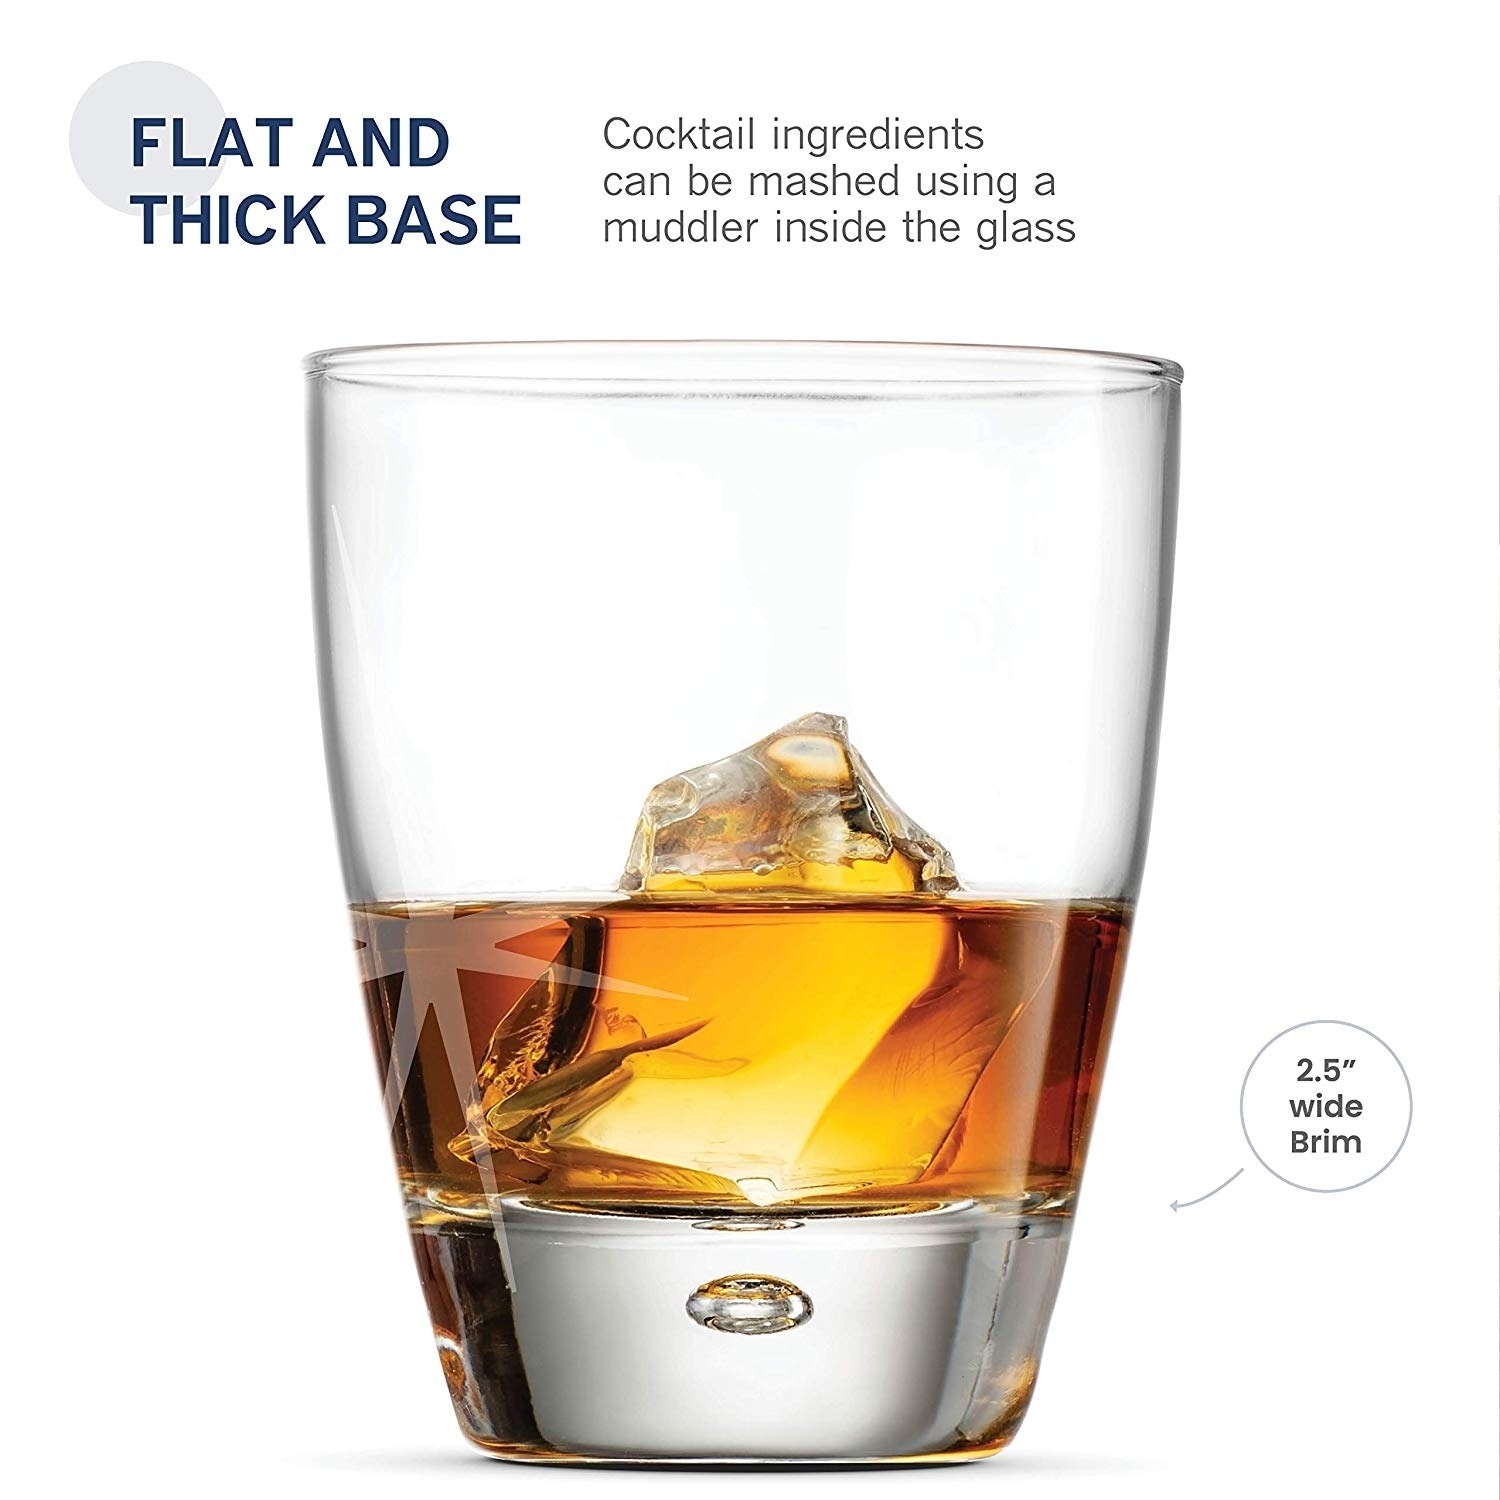 https://ak1.ostkcdn.com/images/products/29043486/Double-Old-Fashioned-Whiskey-glasses-Set-of-4-Whiskey-Glass-set-11.75-Oz-Crystal-Cocktail-Glasses-For-Whisky-Bourbon-Scotch-031ed8dd-8b6e-4220-aea6-5159c2662240.jpg